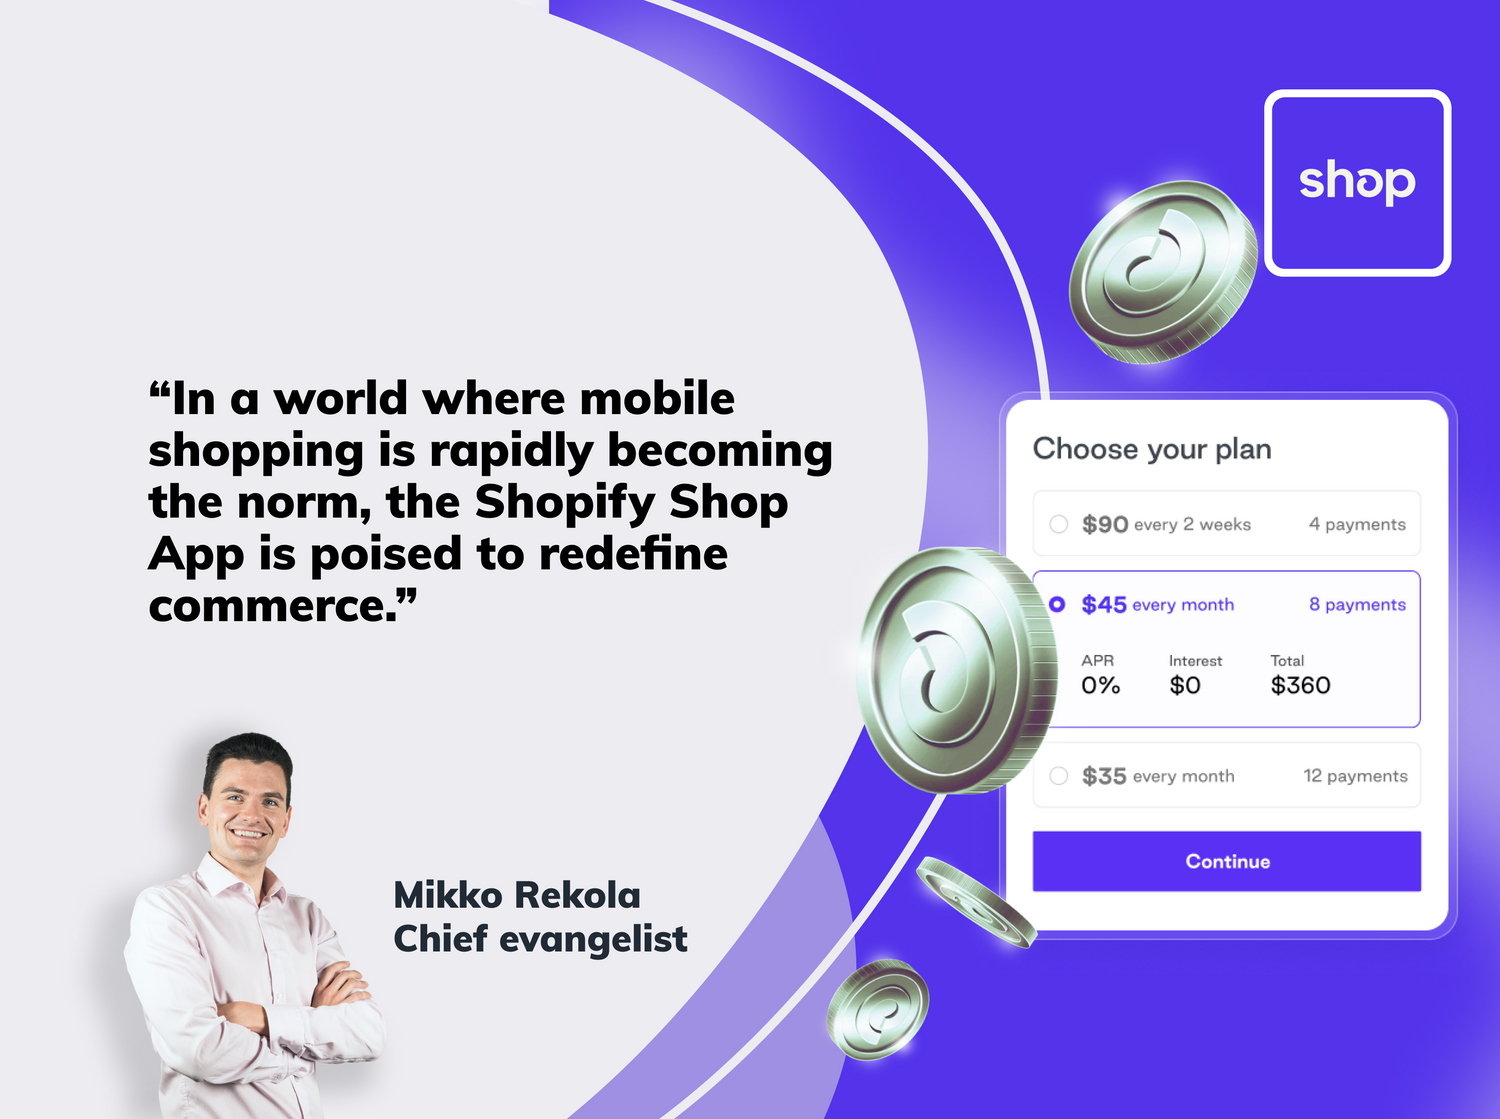 What Shopify Shop app is all about?